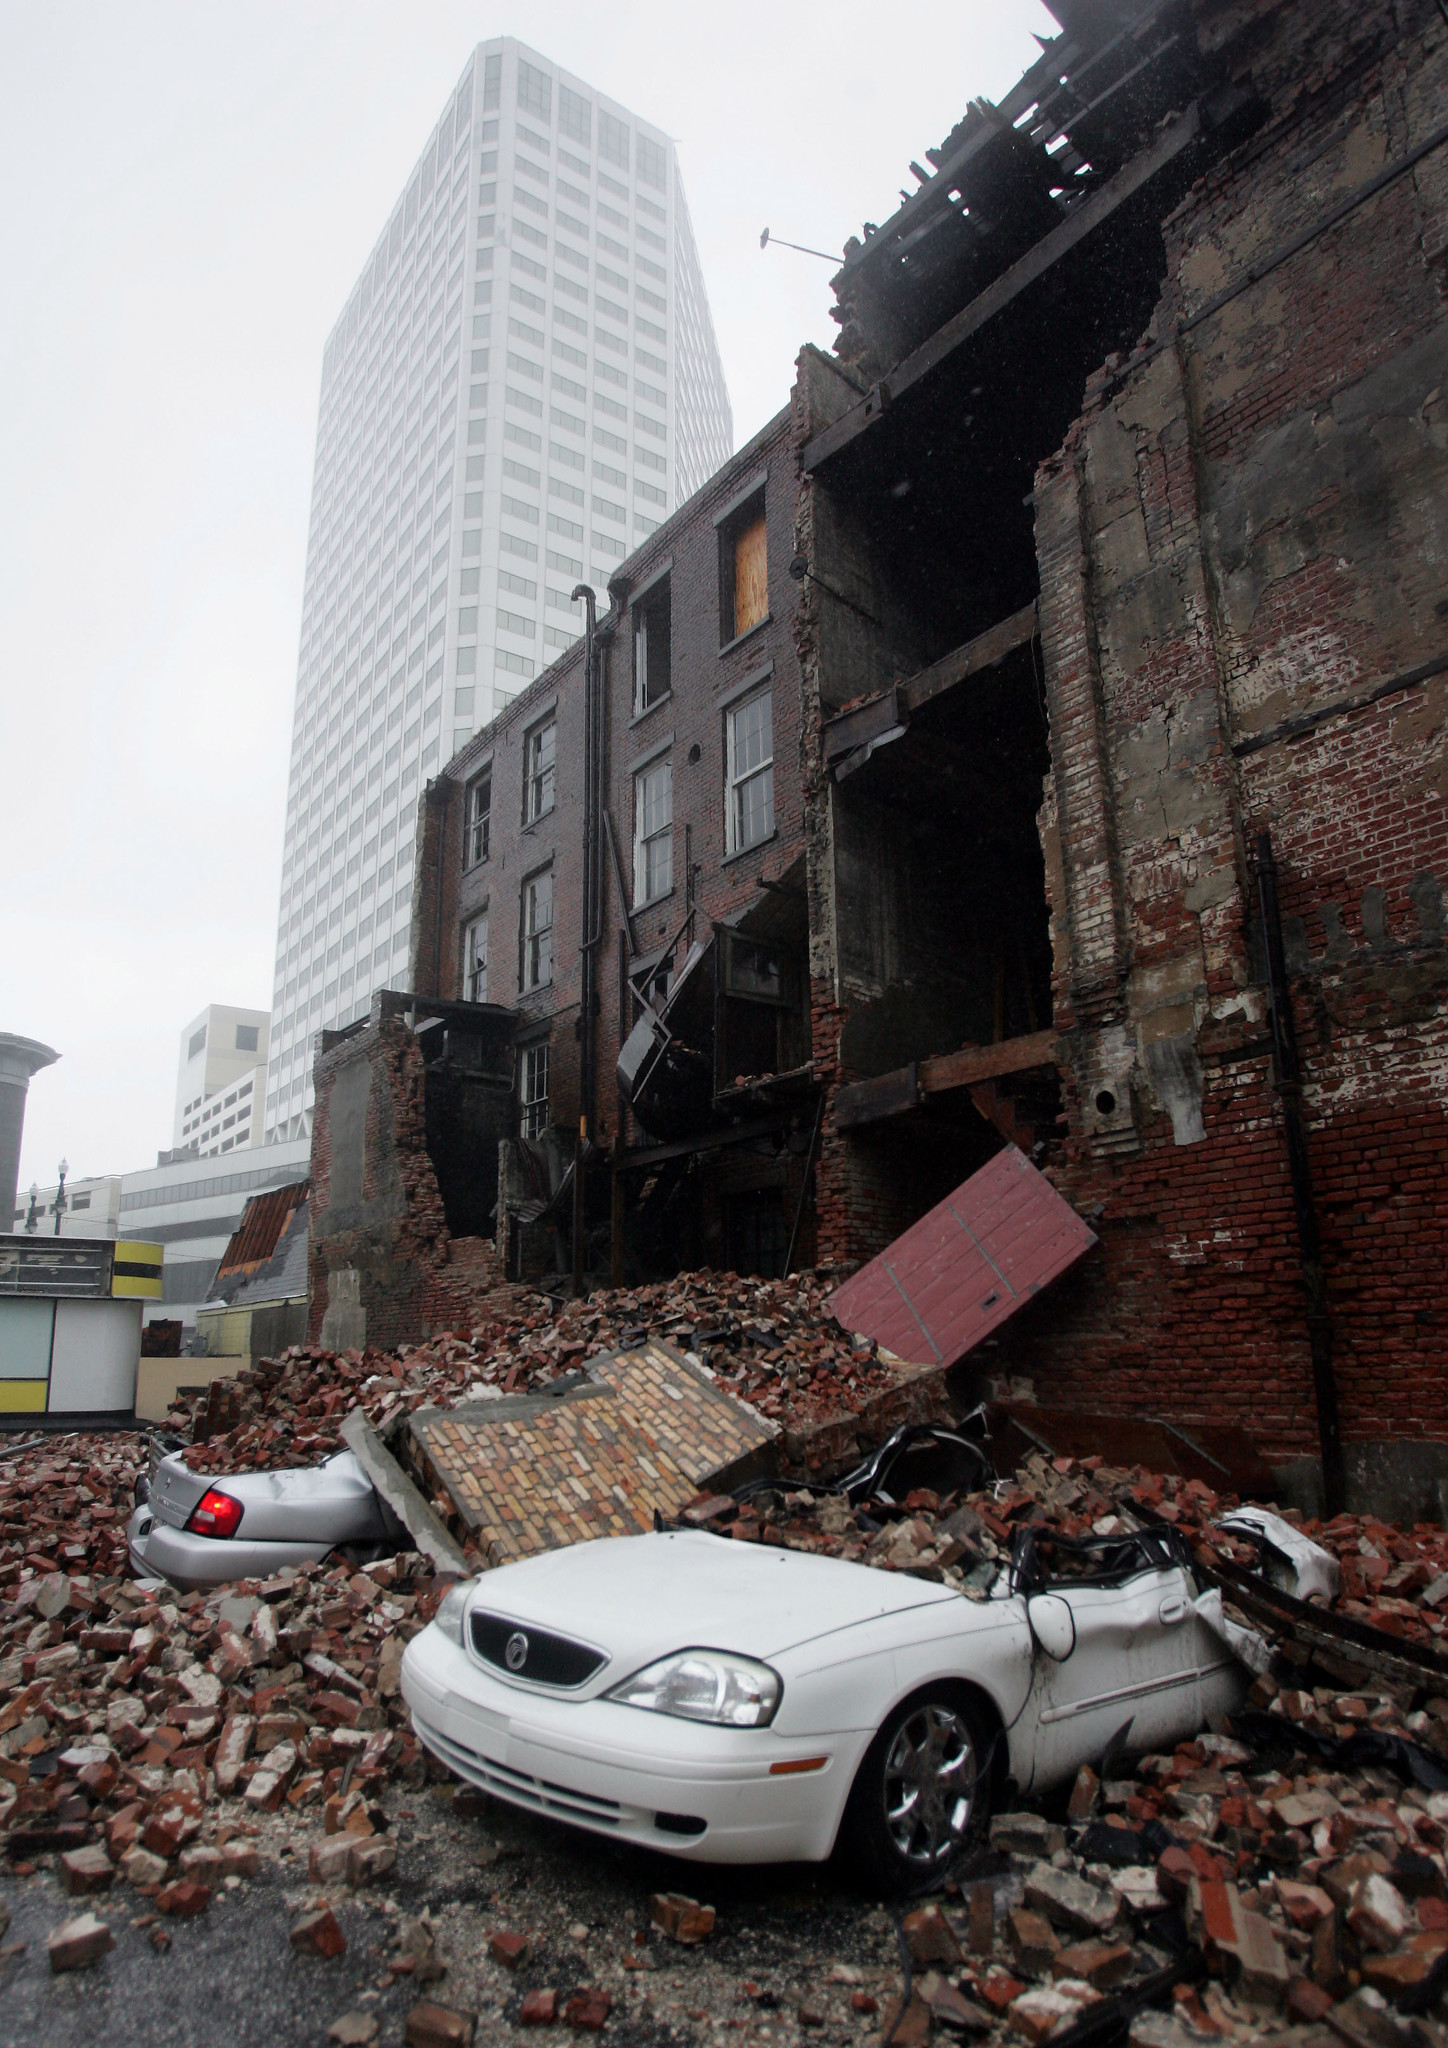 Debris from a fallen building covers streets in downtown New Orleans.